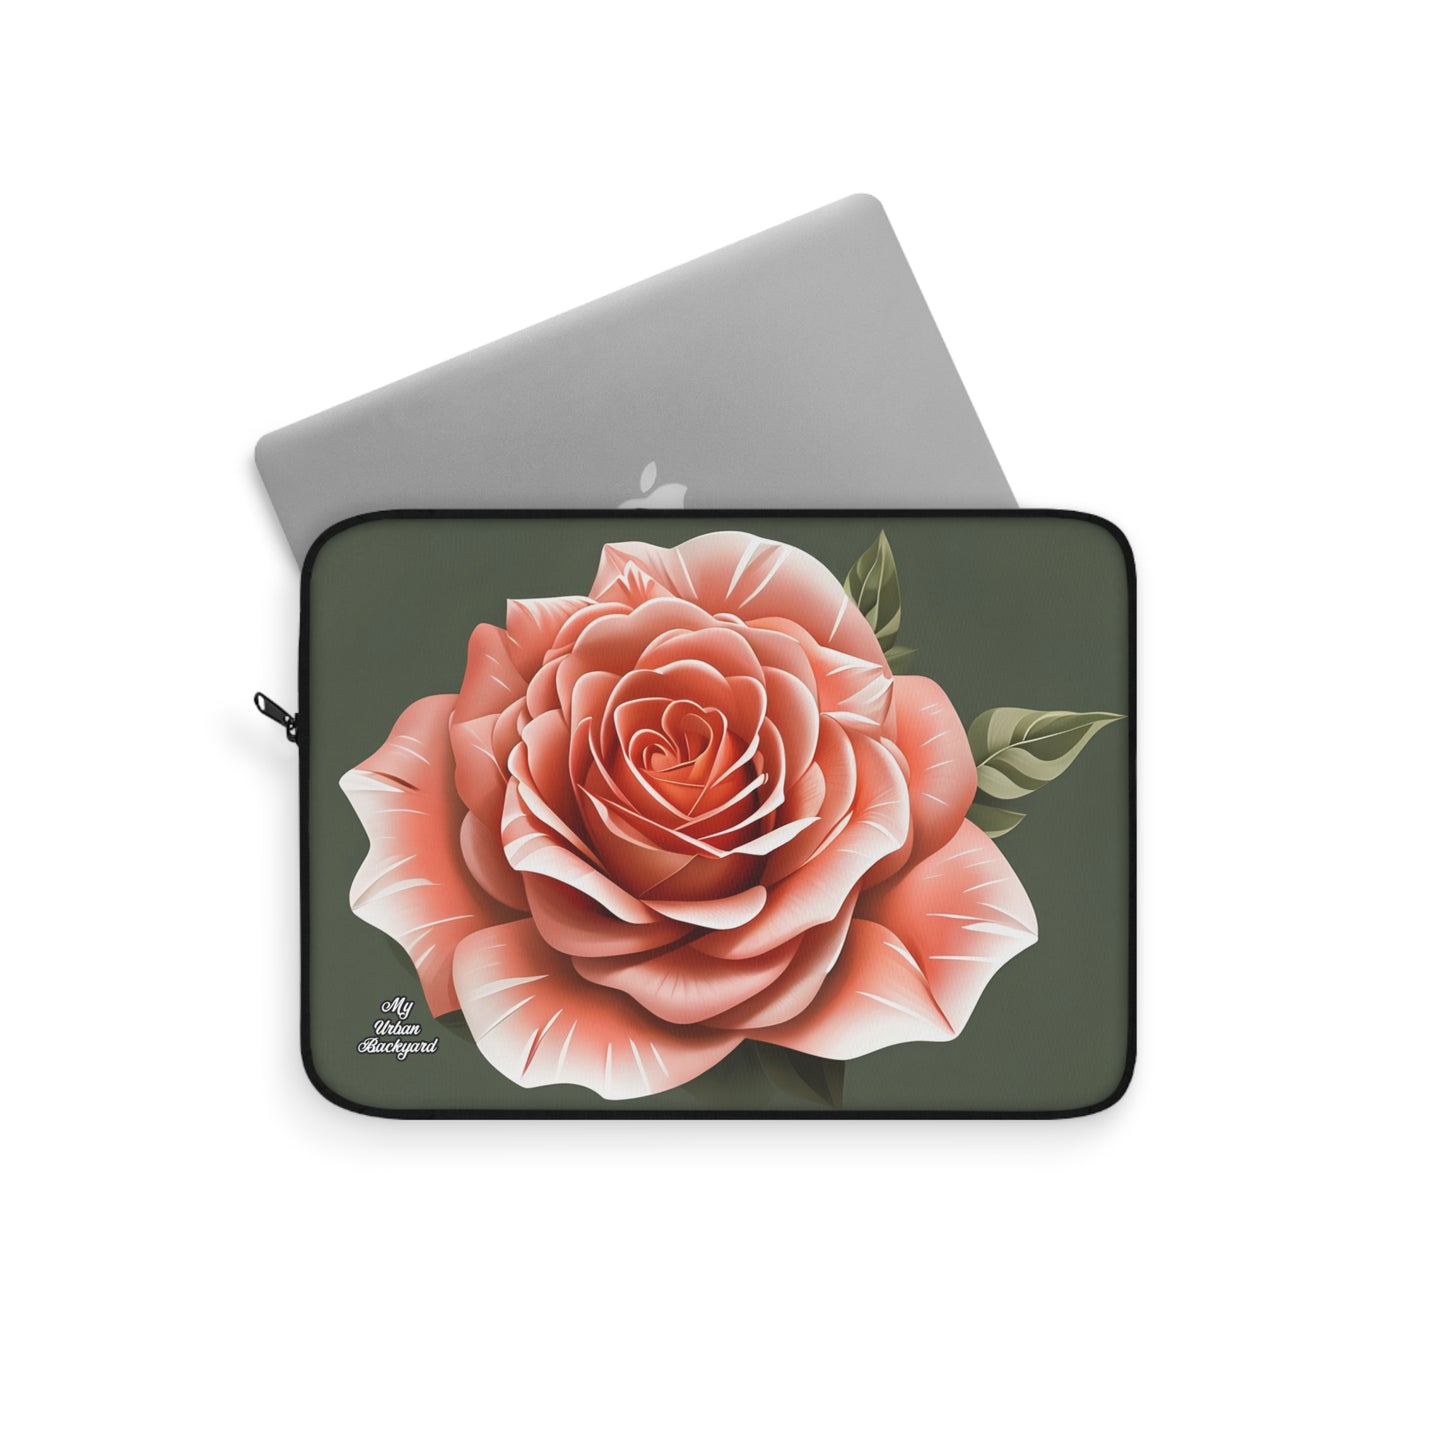 Rose Flower, Laptop Carrying Case, Top Loading Sleeve for School or Work